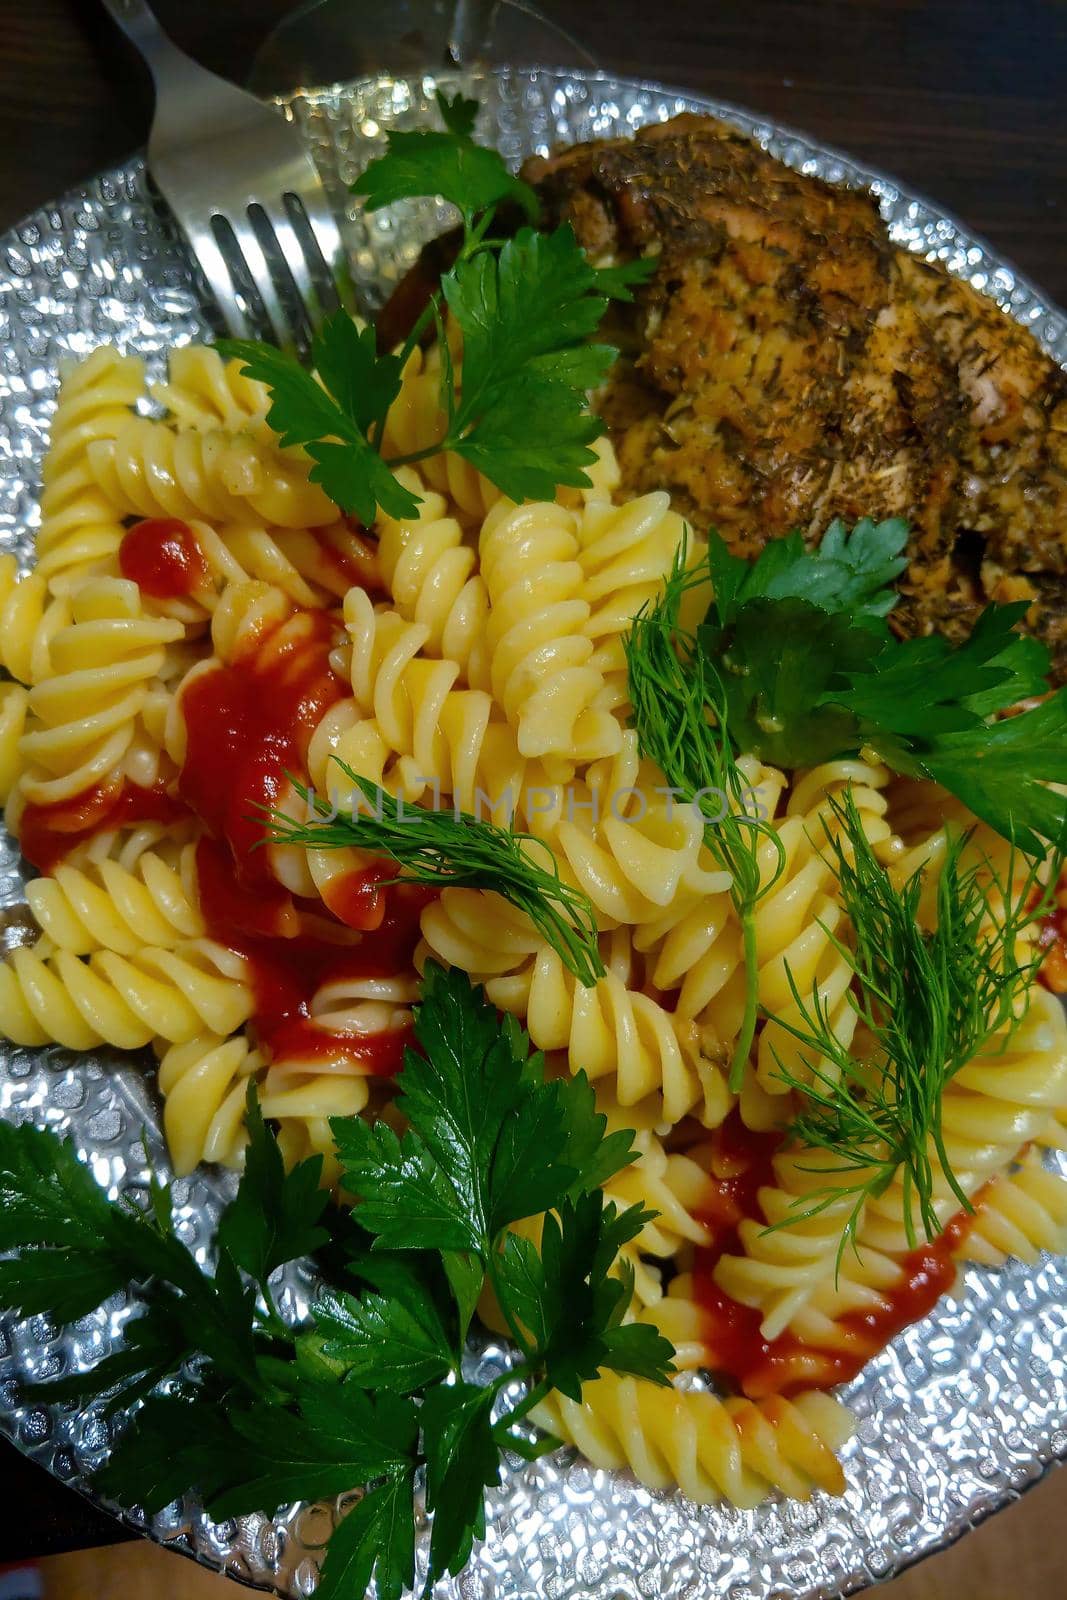 Pasta with chicken pieces and herbs on a white plate